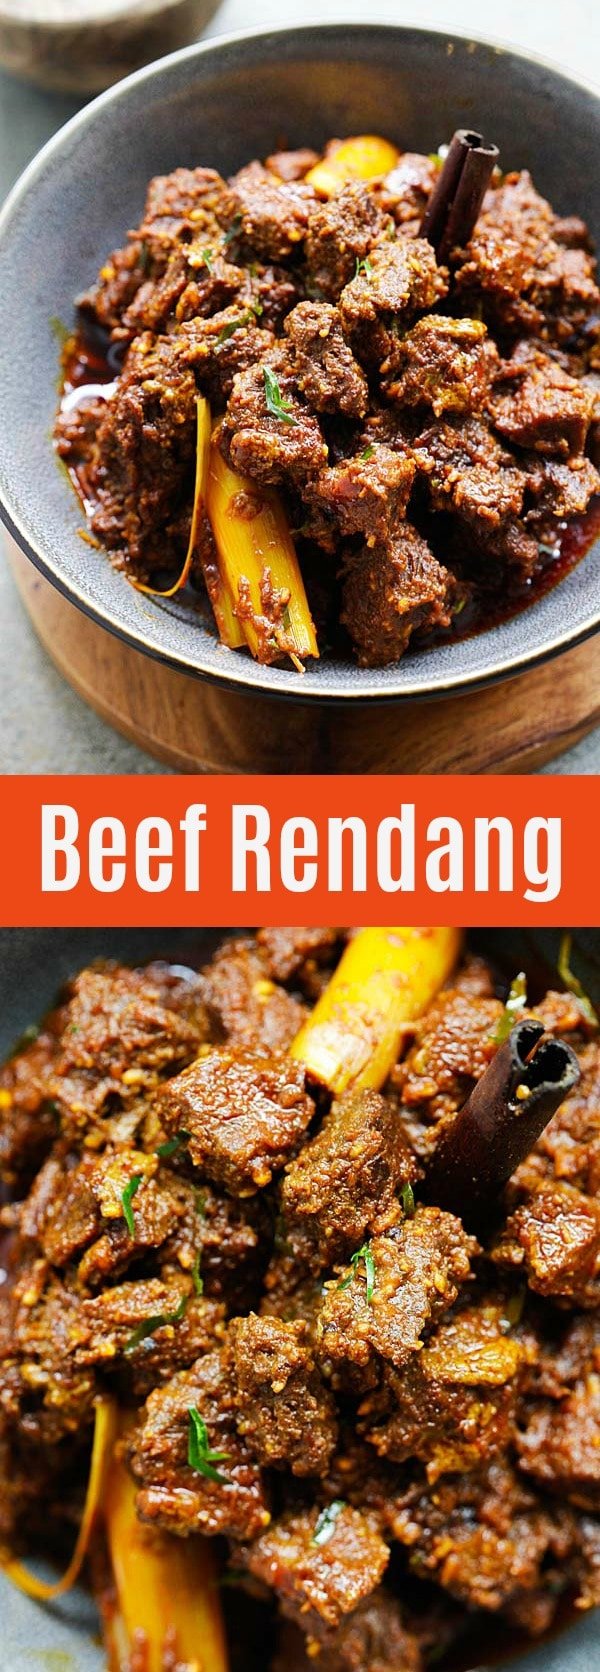 Beef Rendang - the best and most authentic beef rendang recipe you will find online! Spicy, rich and creamy Malaysian/Indonesian beef stew made with beef, spices and coconut milk | rasamalaysia.com